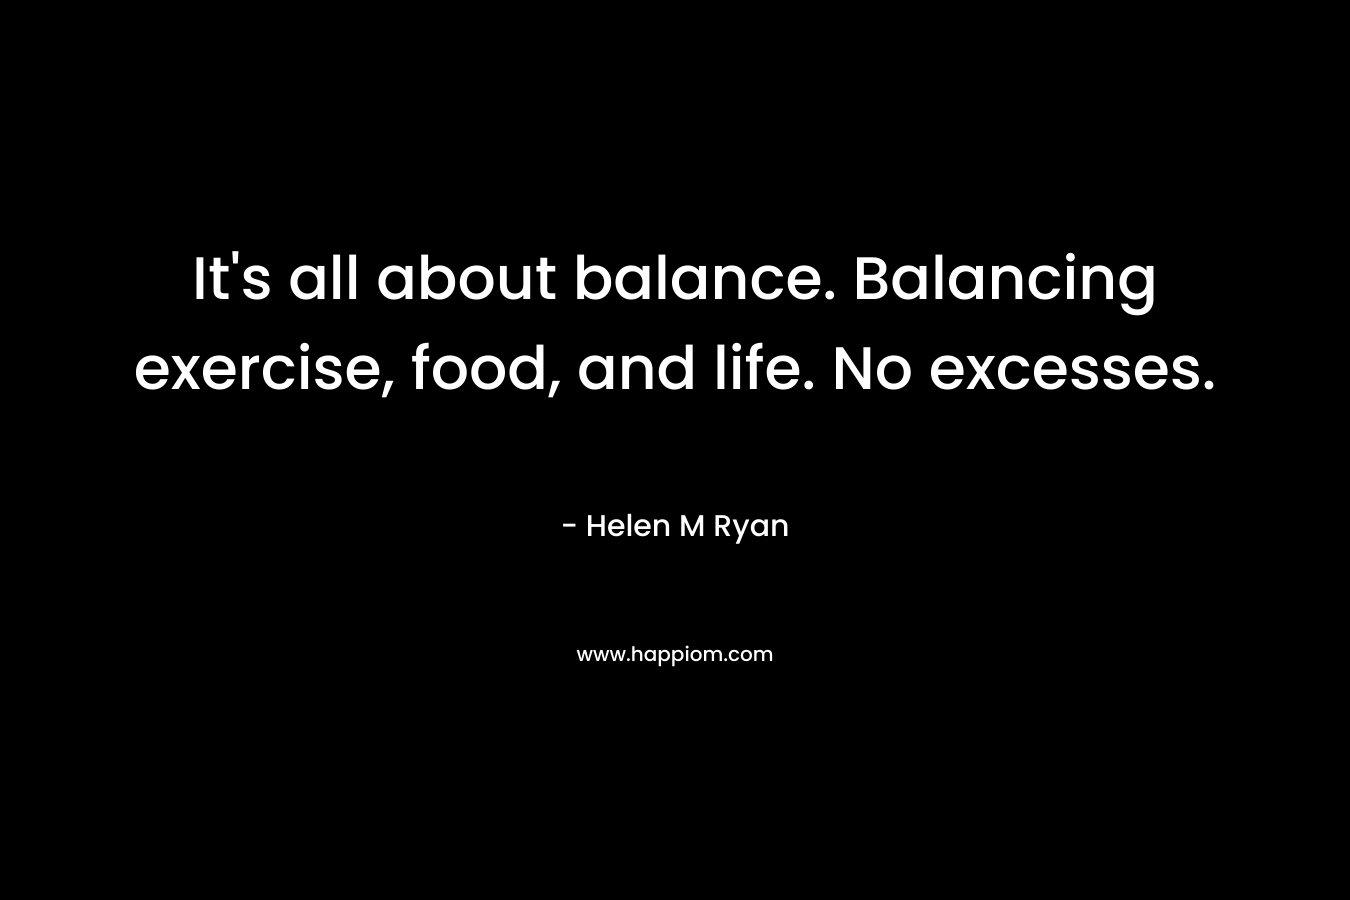 It's all about balance. Balancing exercise, food, and life. No excesses.